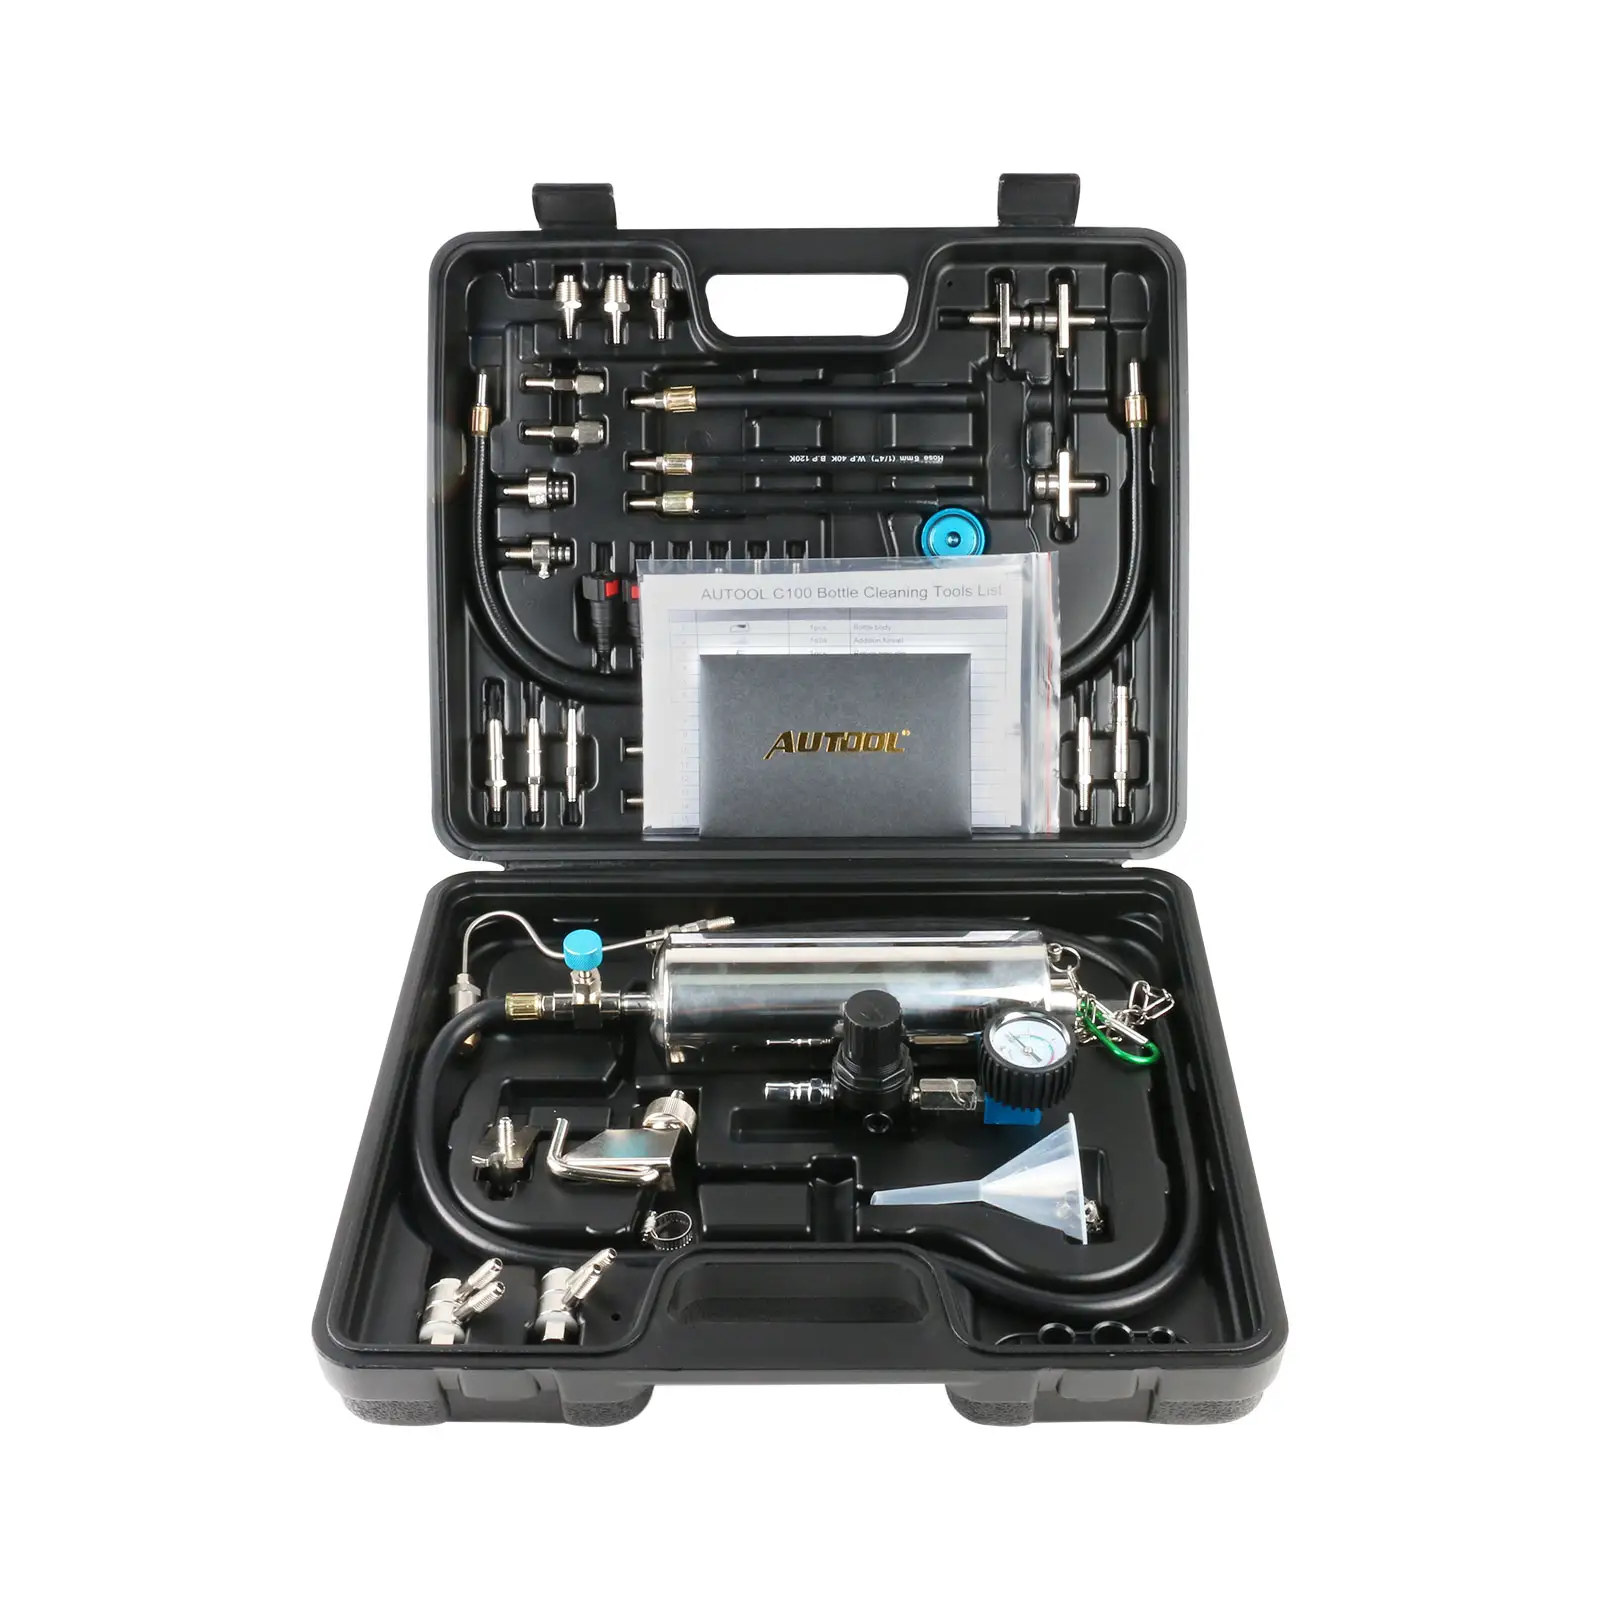 Official AUTOOL Car cleaning kit C100 automotive diagnostic tool kit used for cleaning throttle valve clean fuel injector nozzle